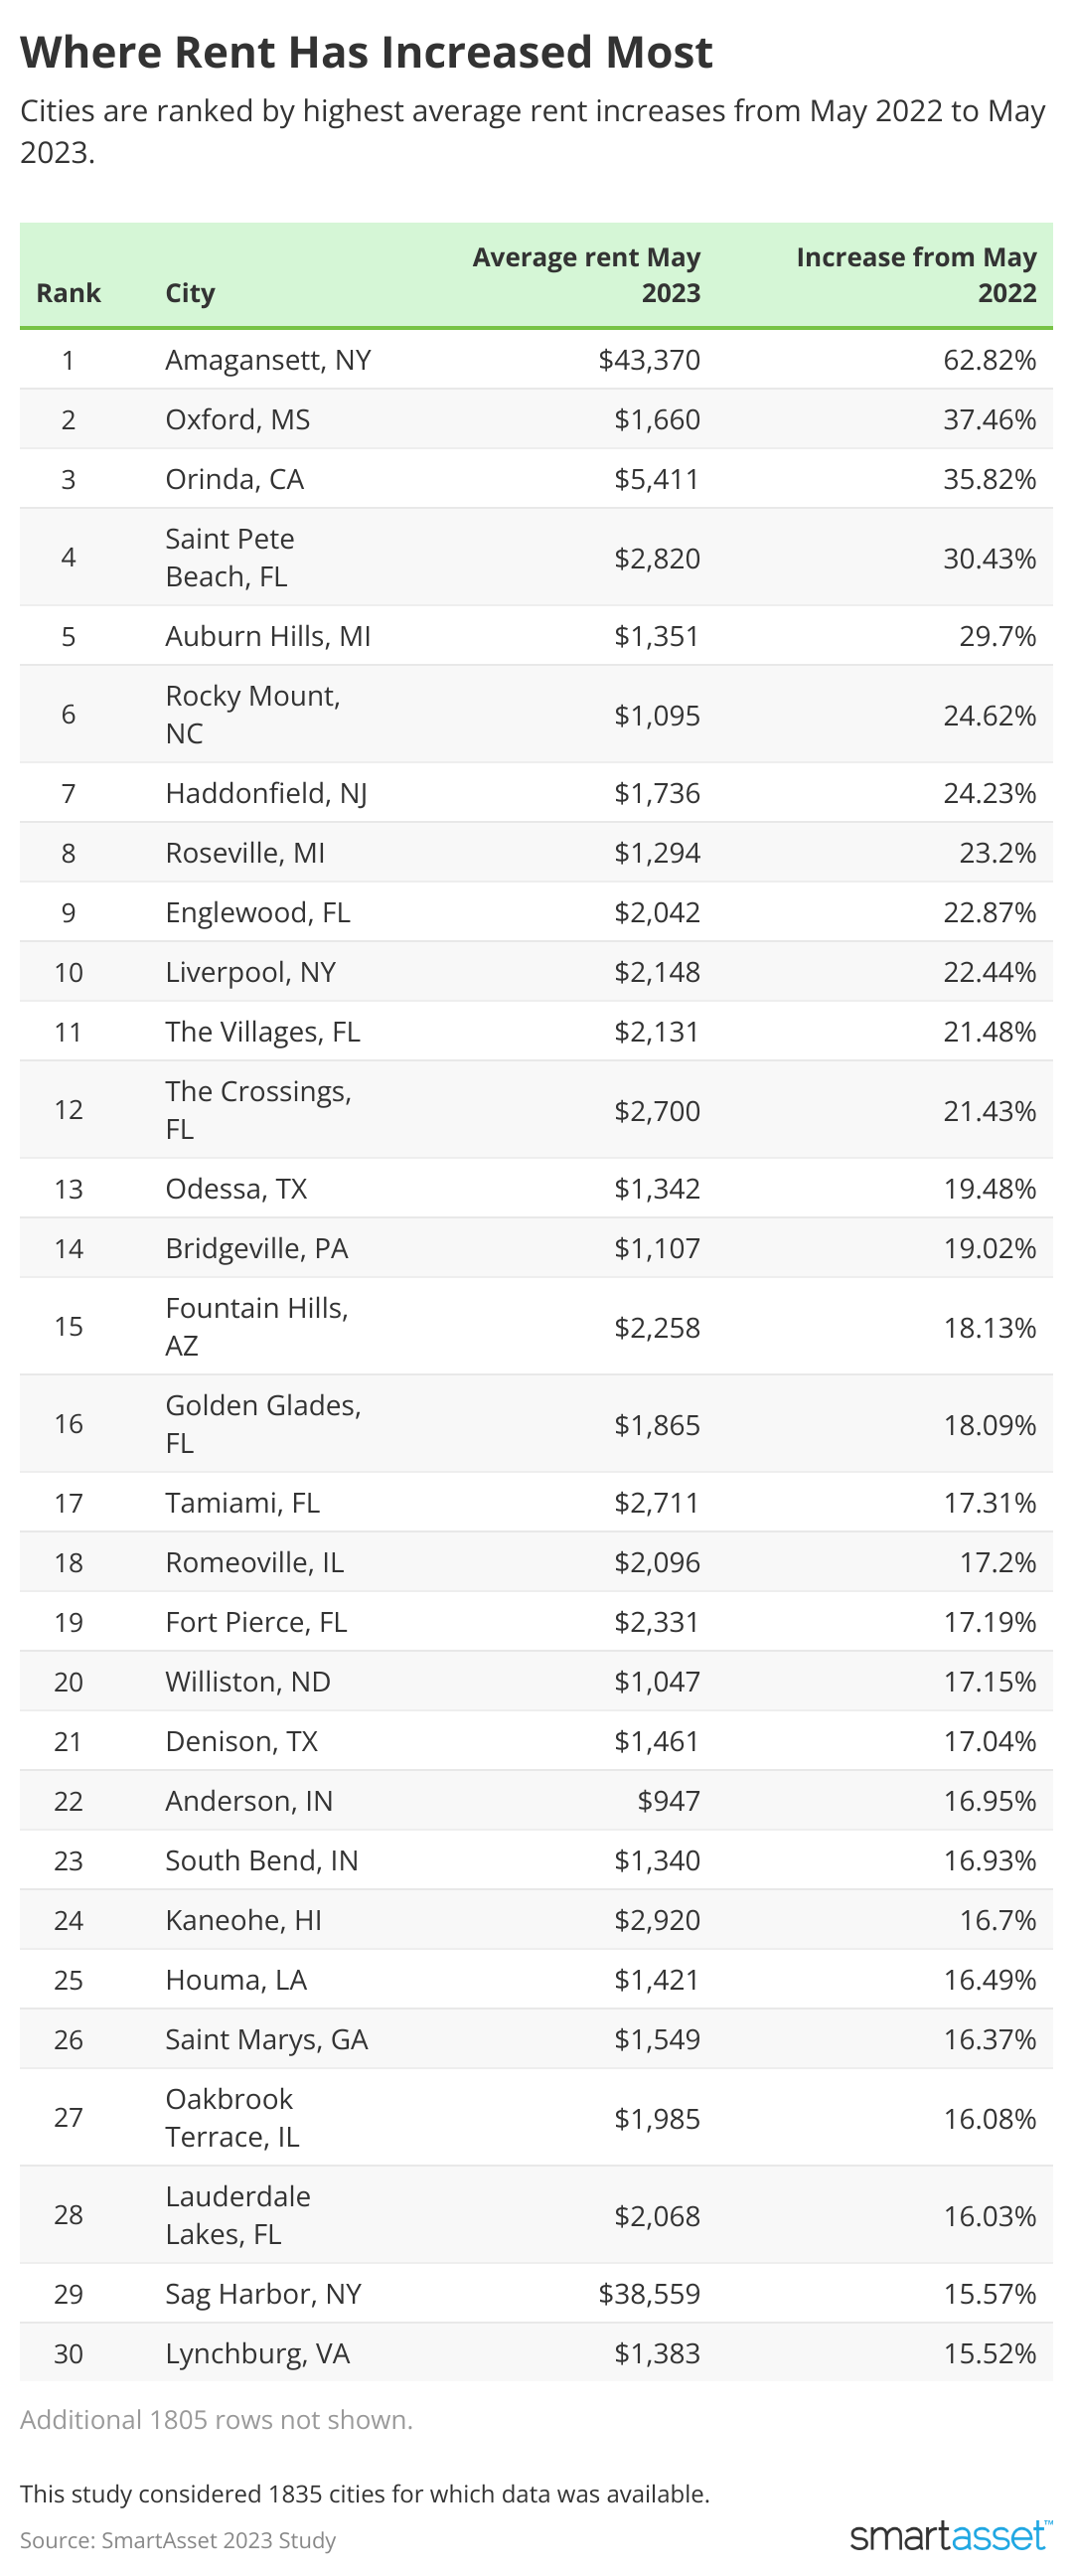 A table listing the top 30 U.S. cities where rent increased the most from May 2022 to May 2023.